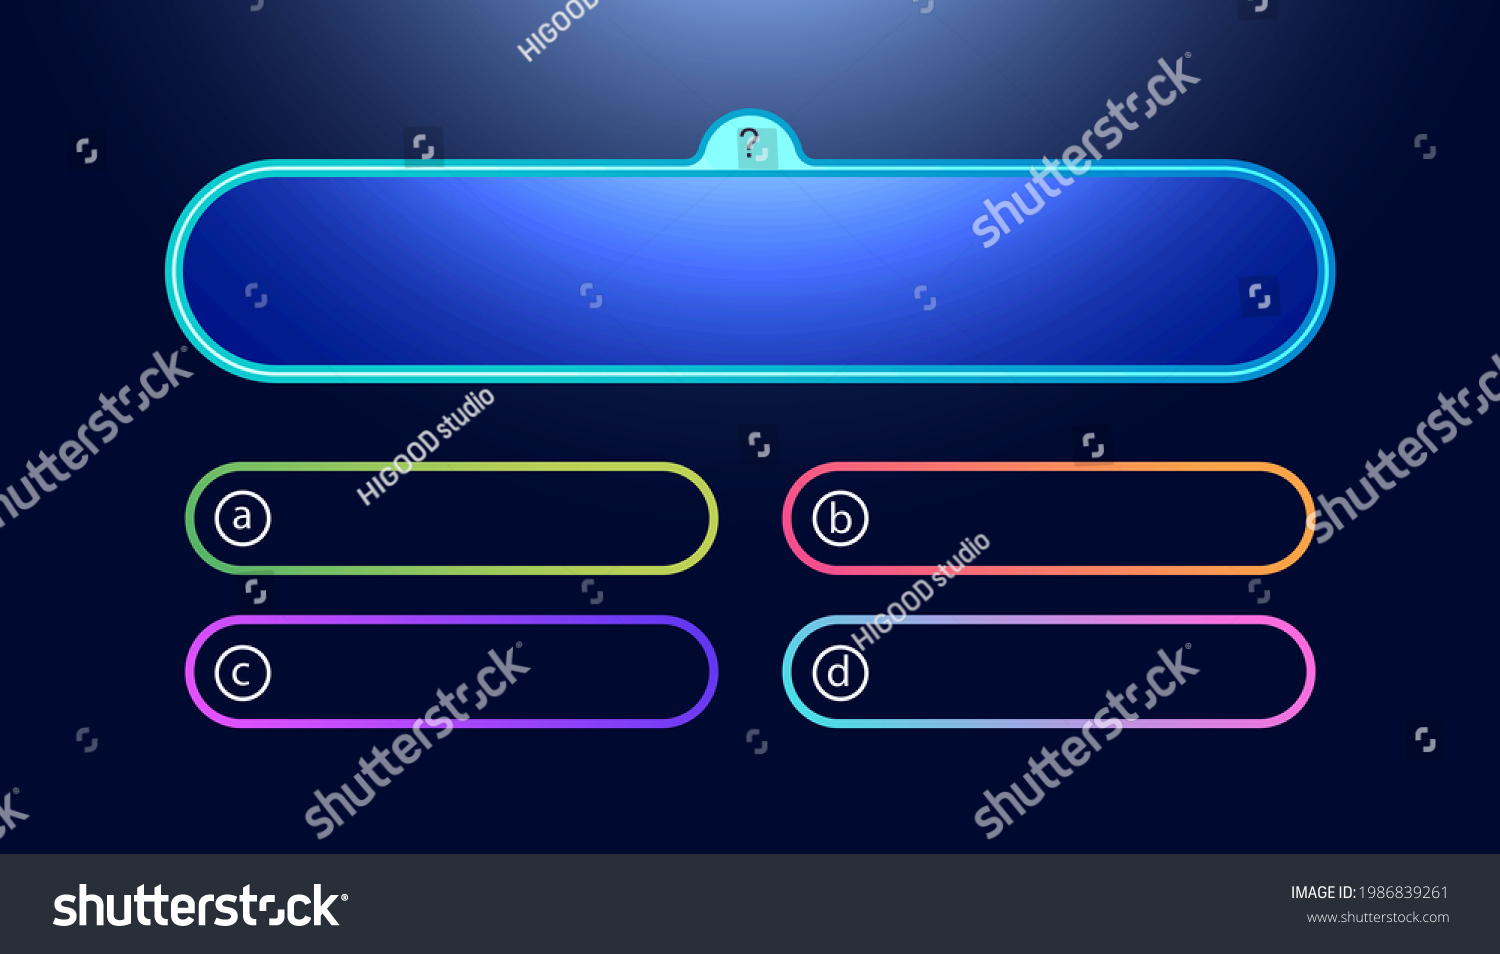 SVG of Vector question and answers template neon style for quiz game, exam, tv show, school, examination test. Illustration 10 eps svg